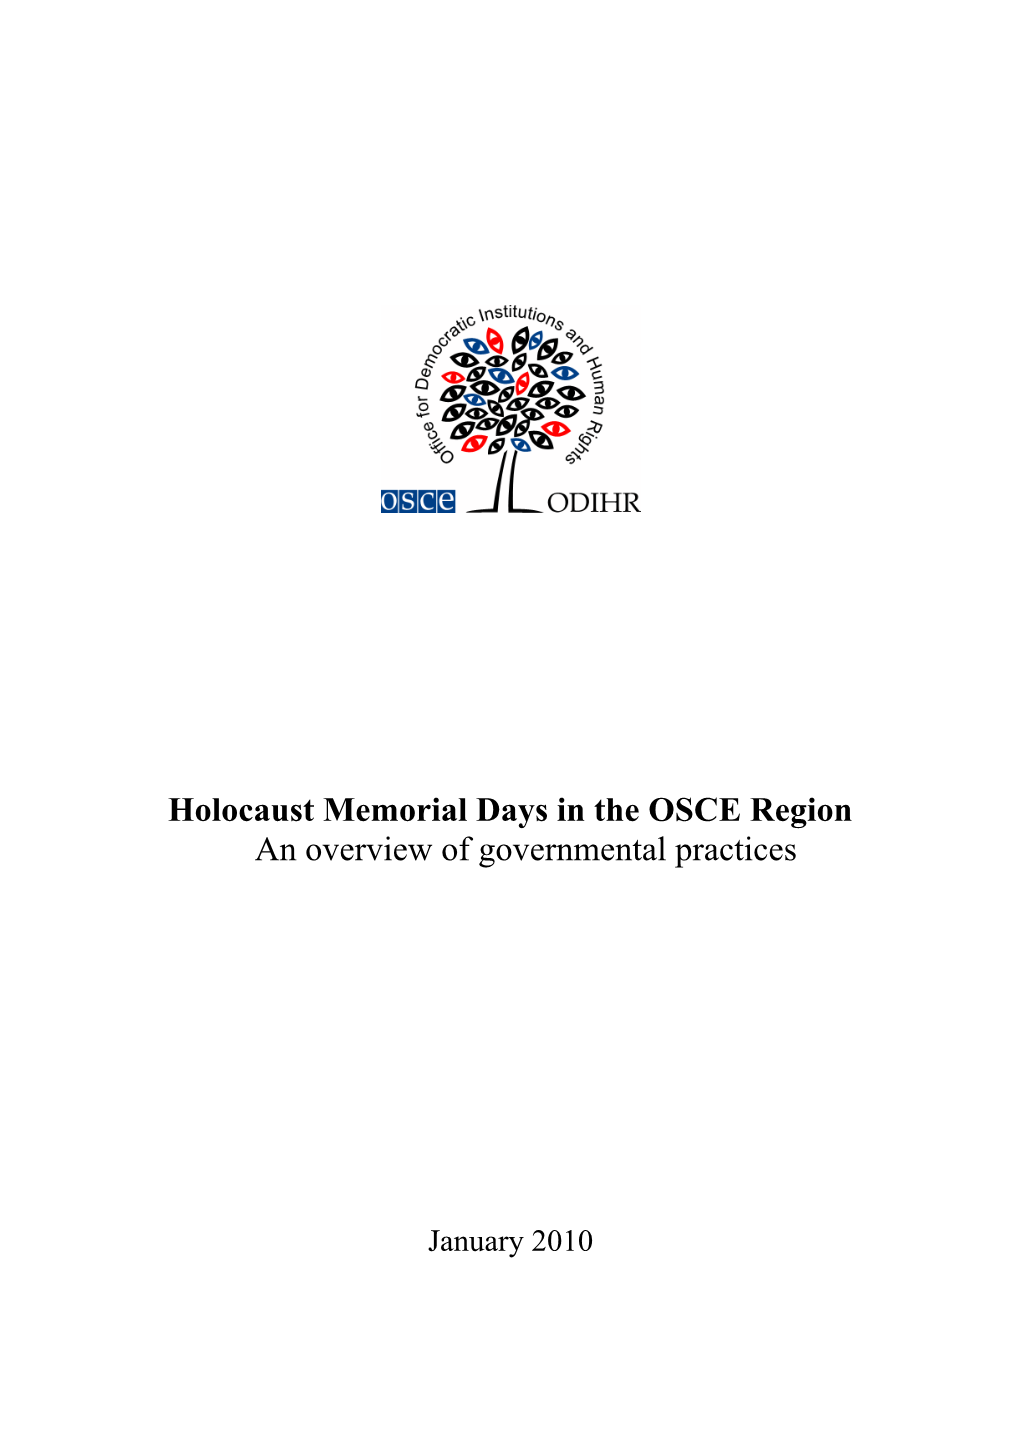 Holocaust Memorial Days in the OSCE Region 2N Overviel of Covern?